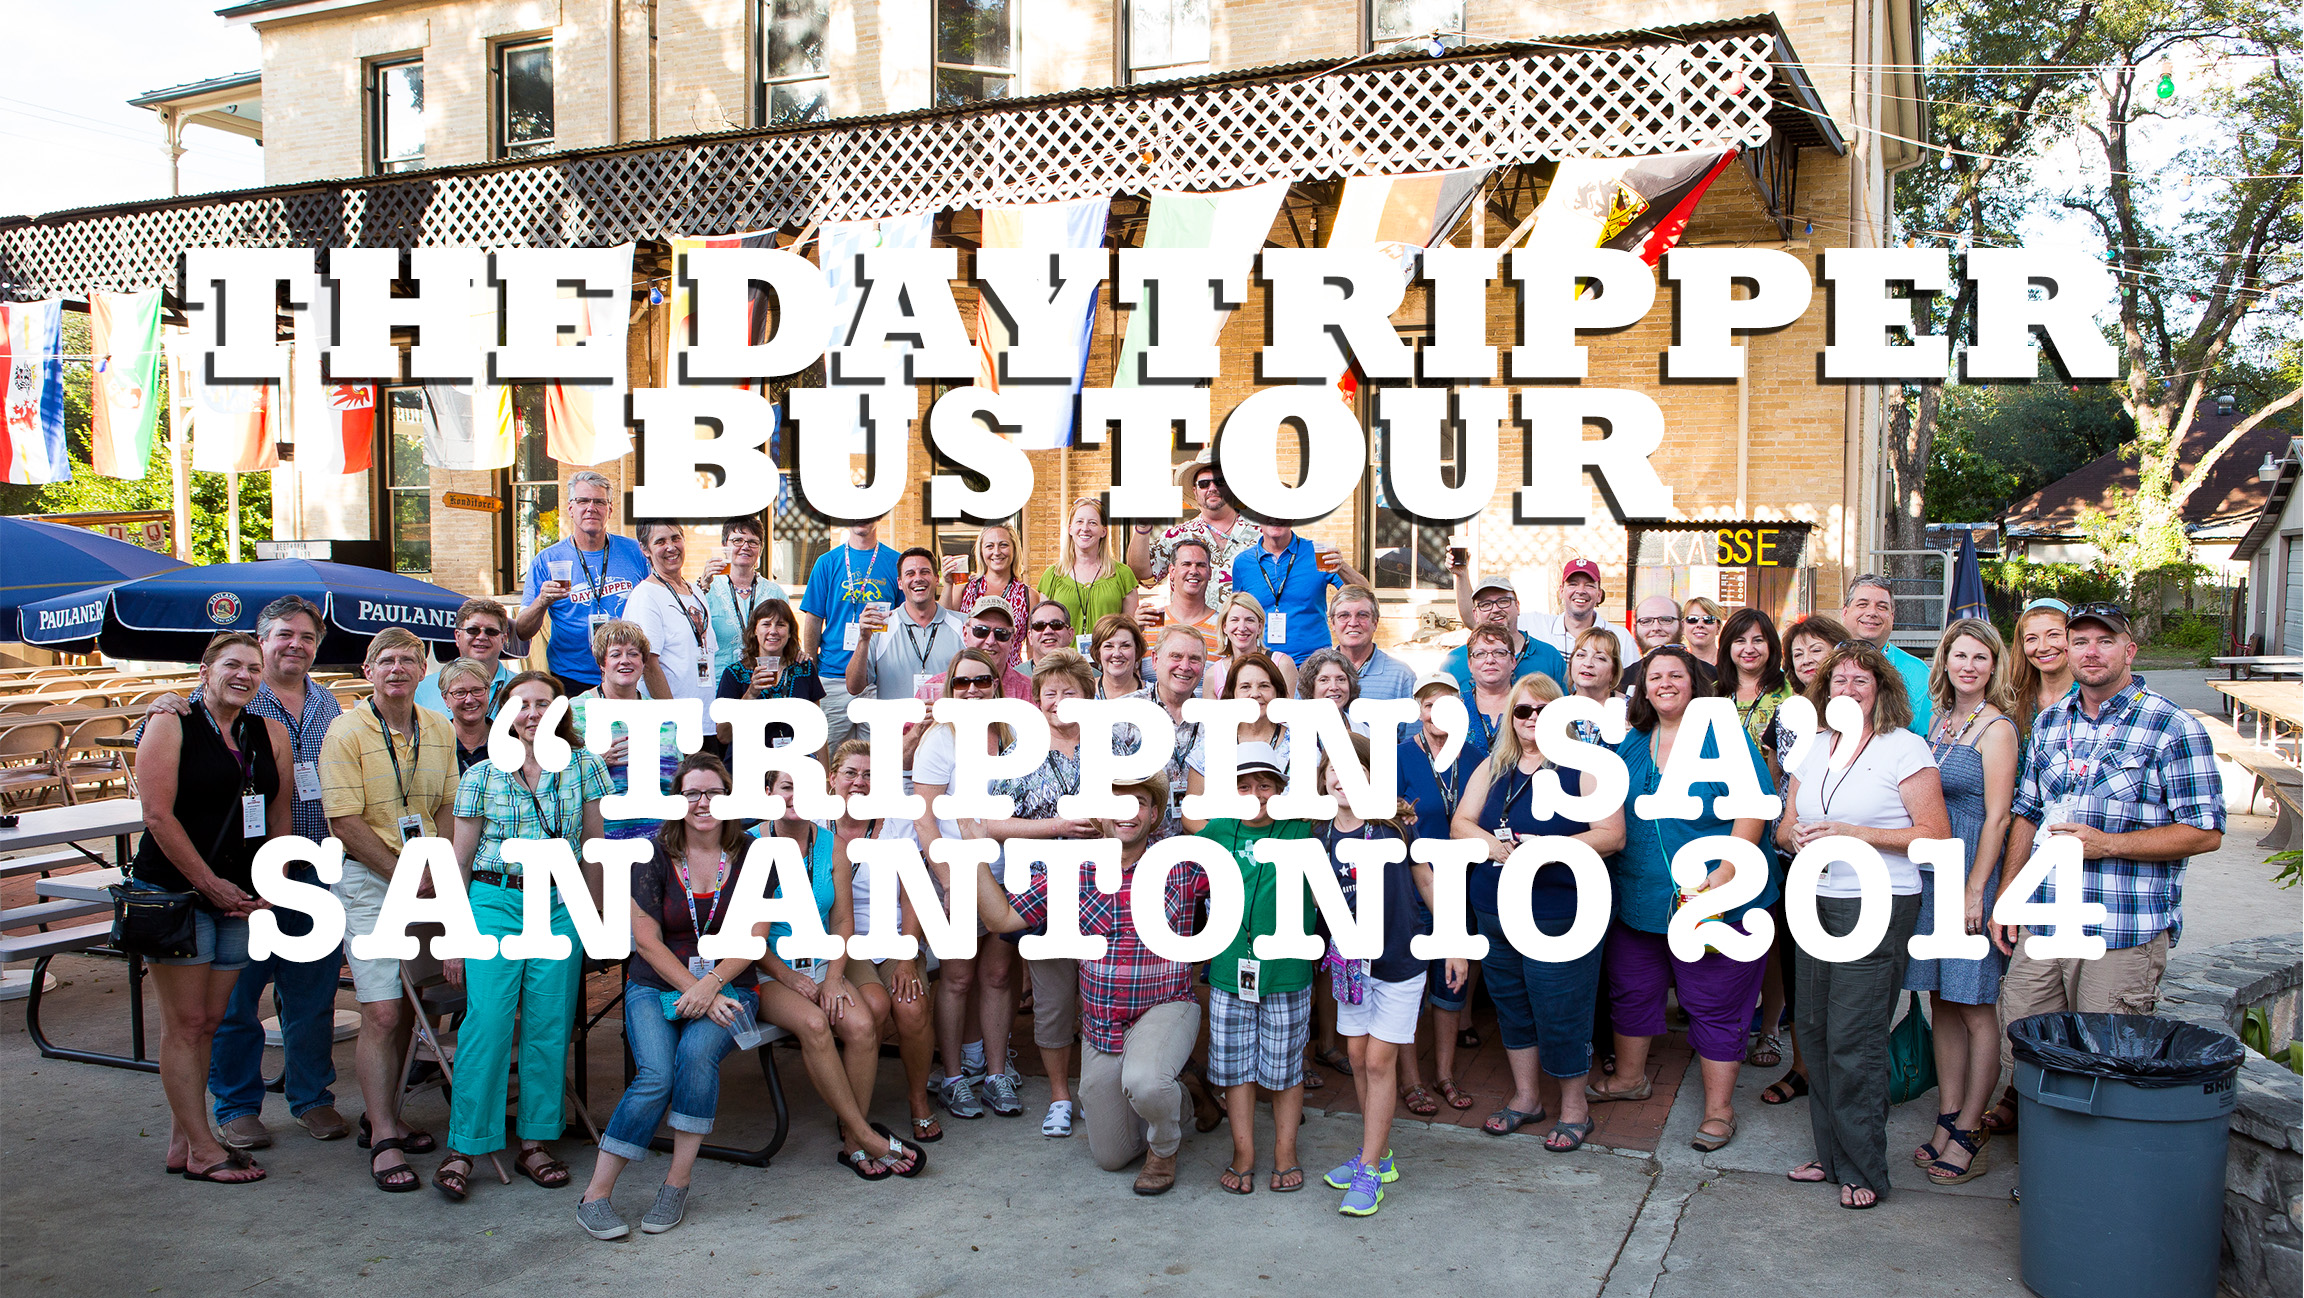 day tripper bus tours